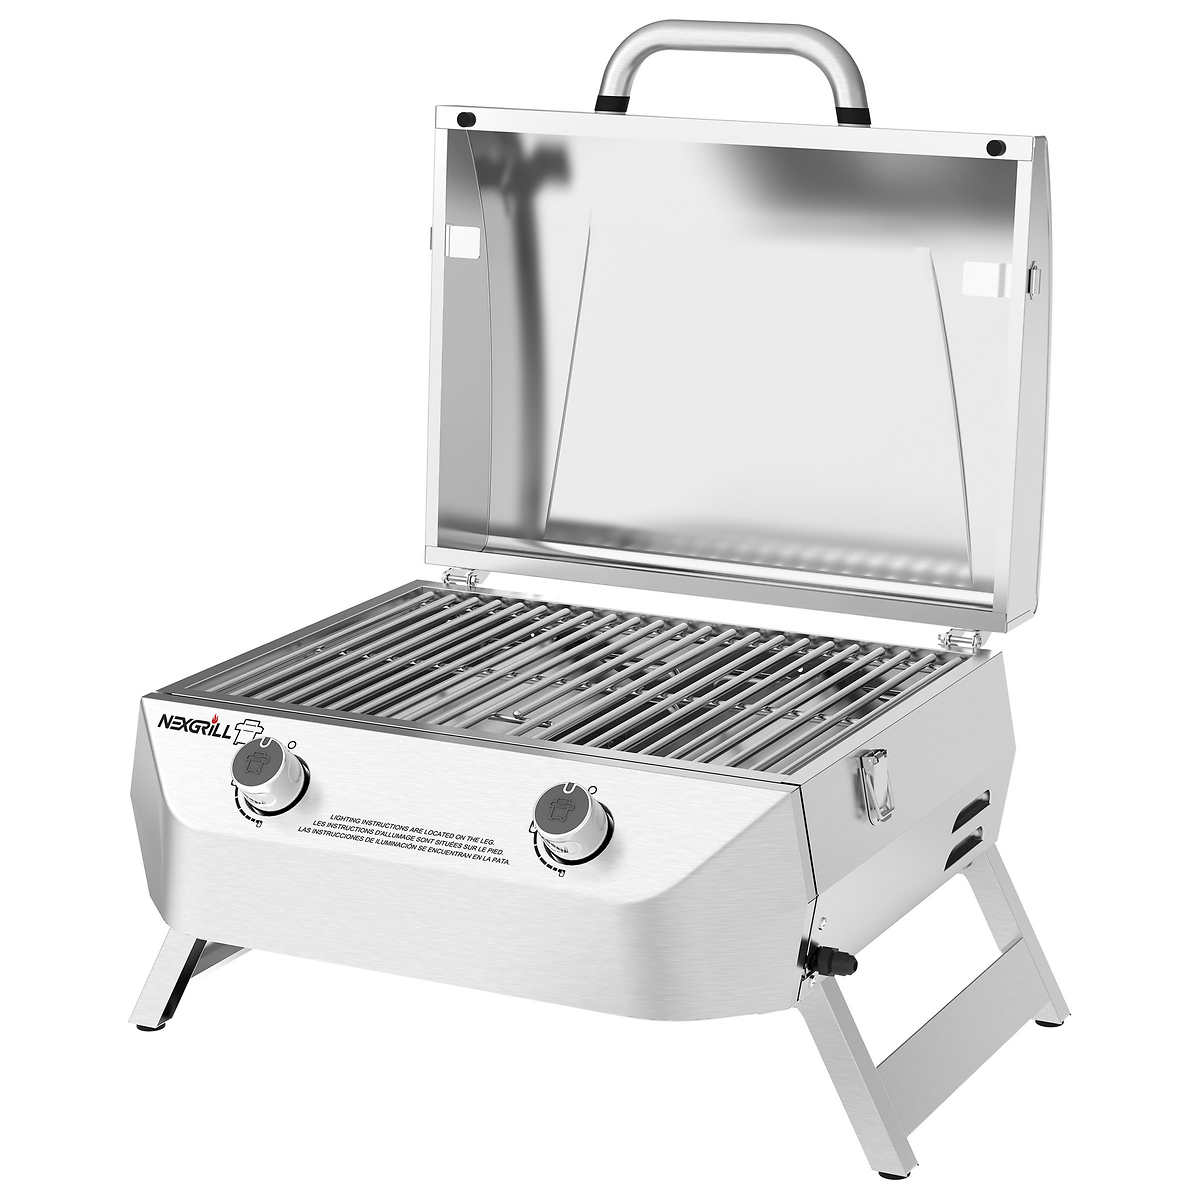 Costco Grills: The Most Affordable Grills in the World